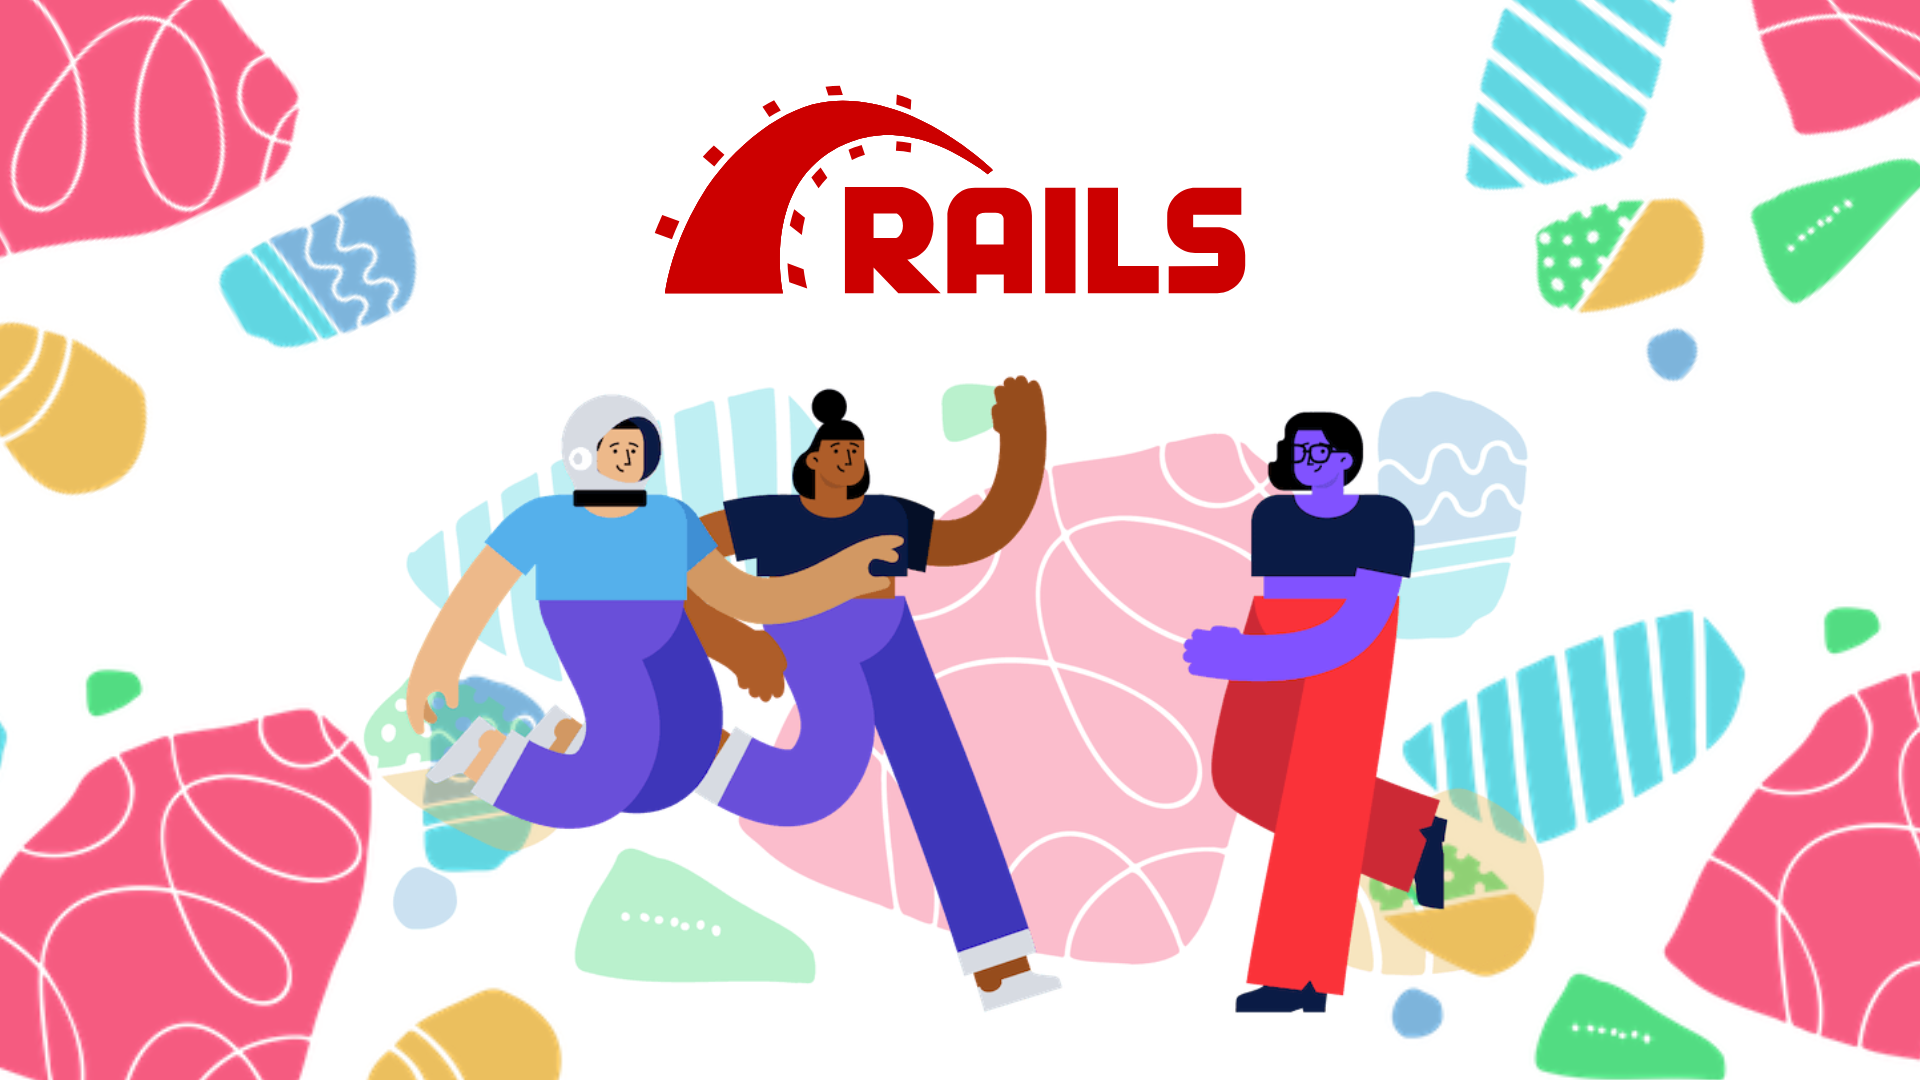 Building Web Apps With Ease: Let’s Learn Rails